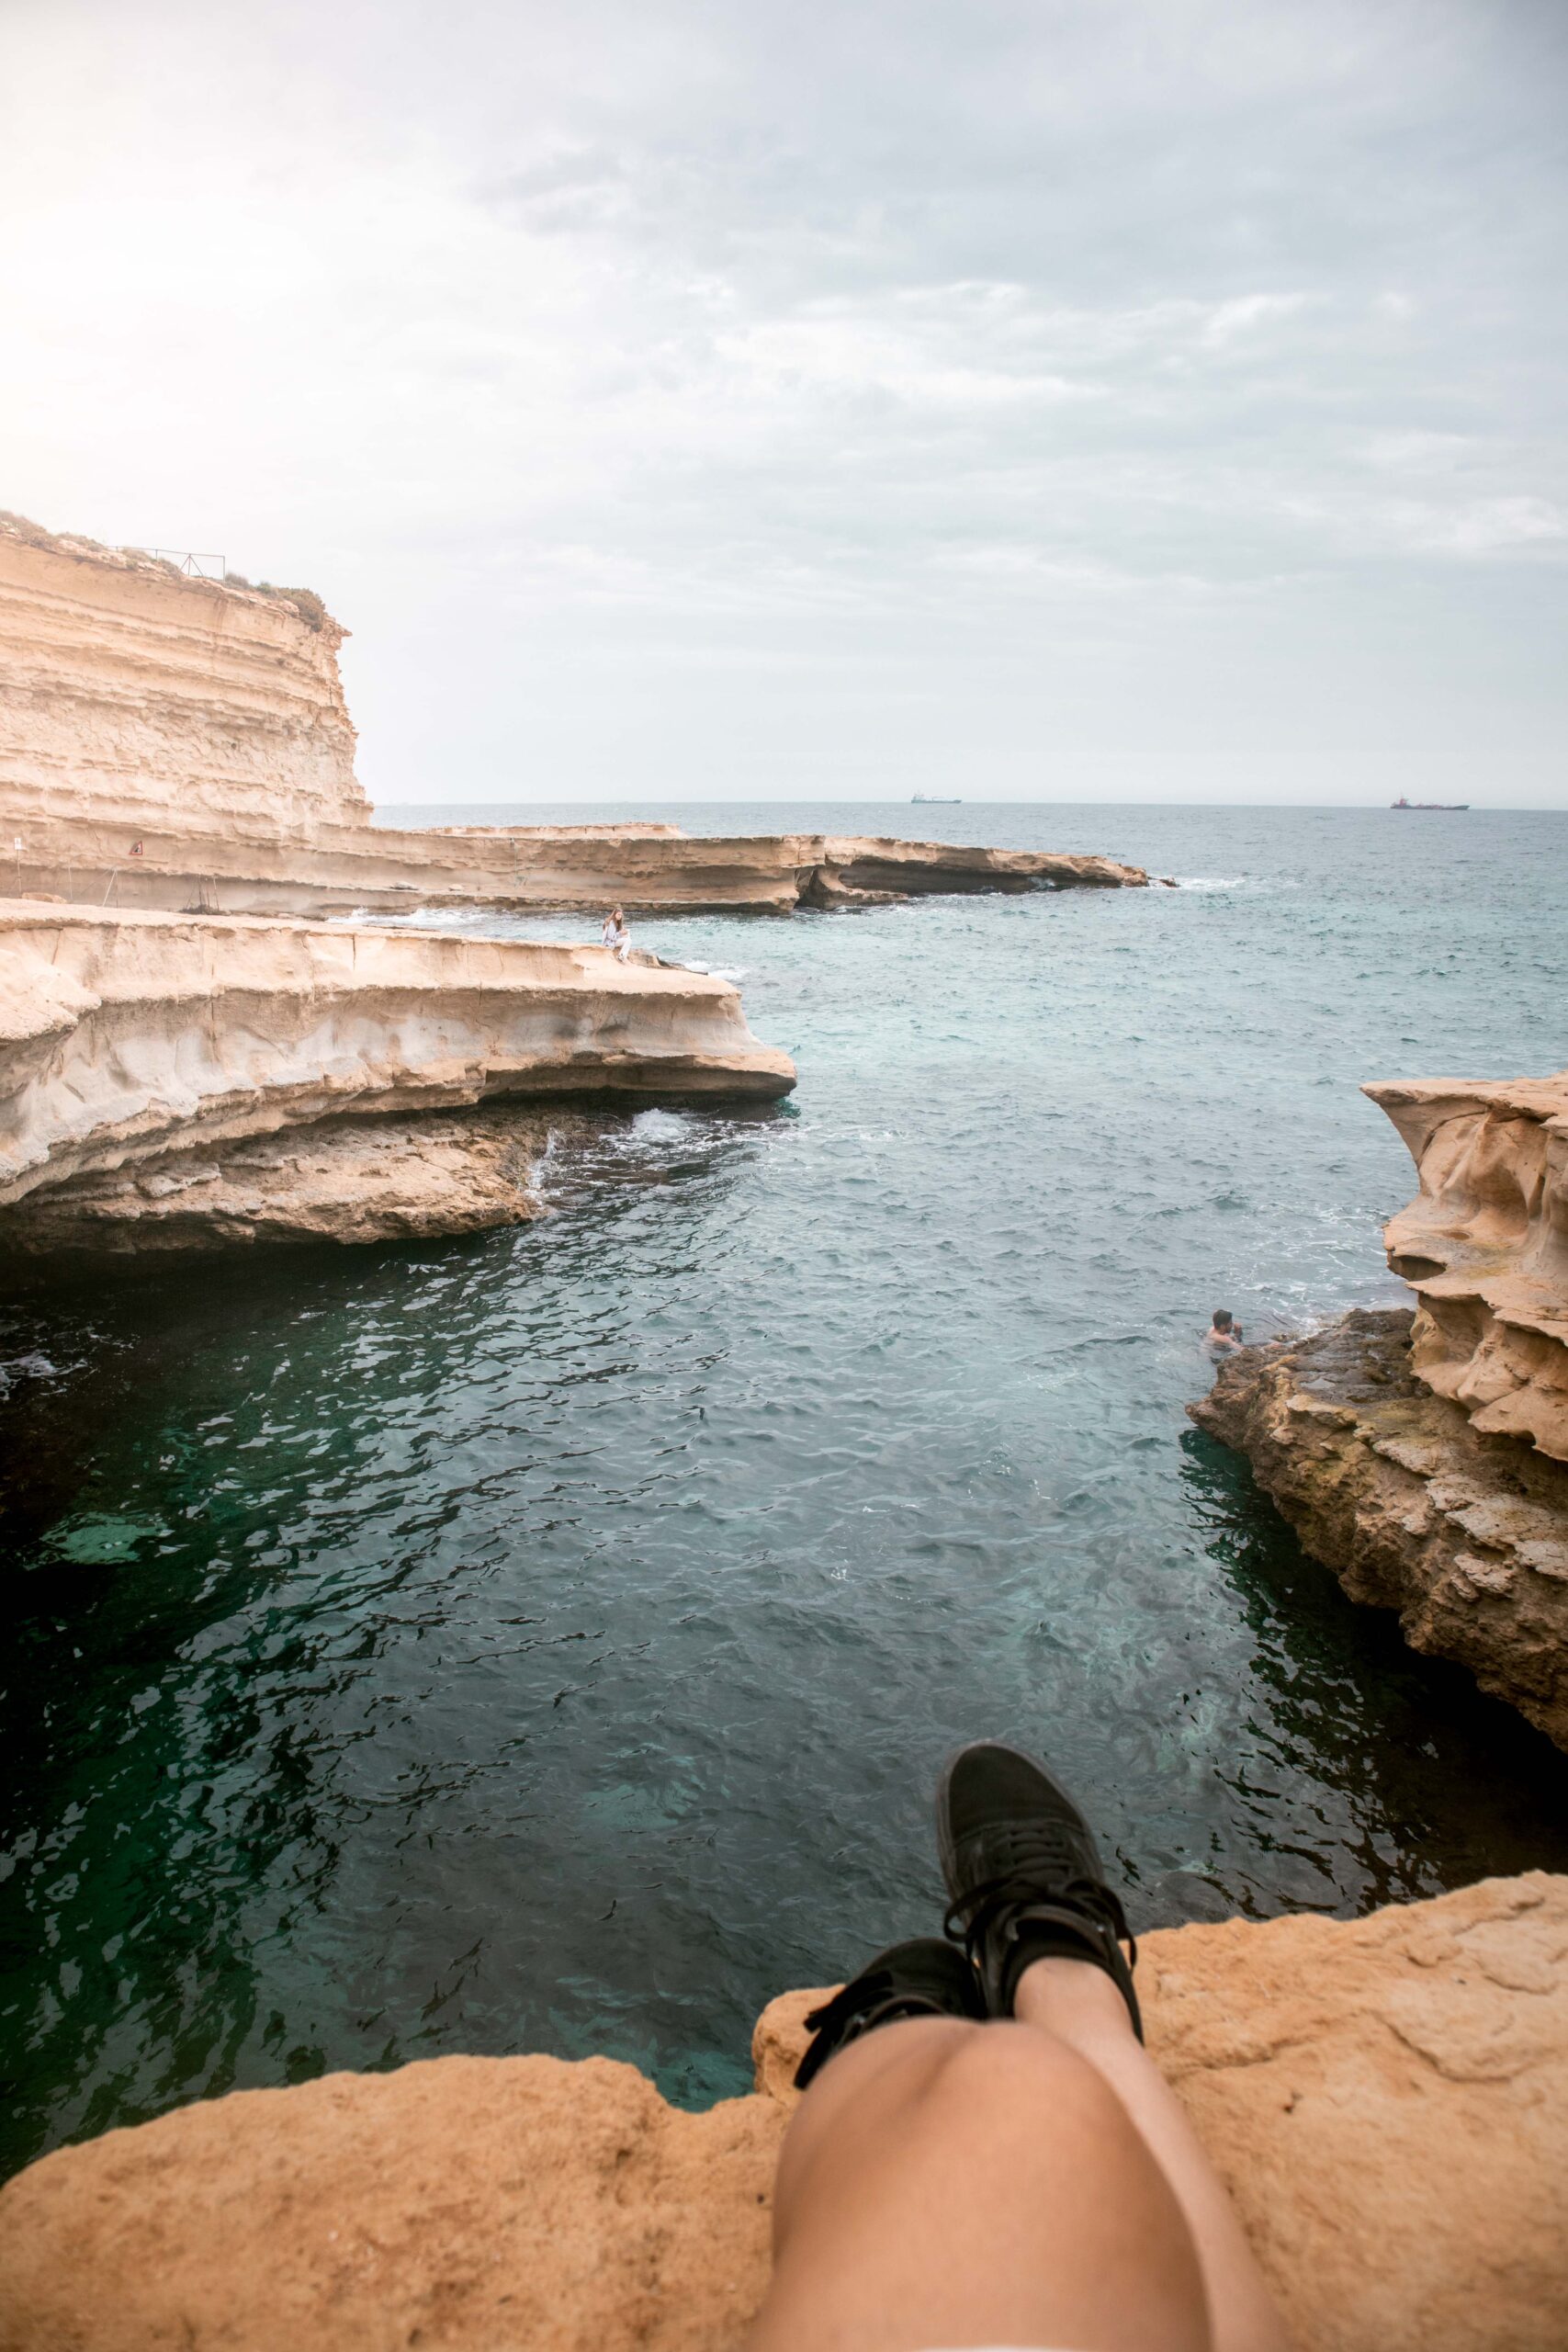 View of Saint Peter's Pool in Malta sitting at the edge